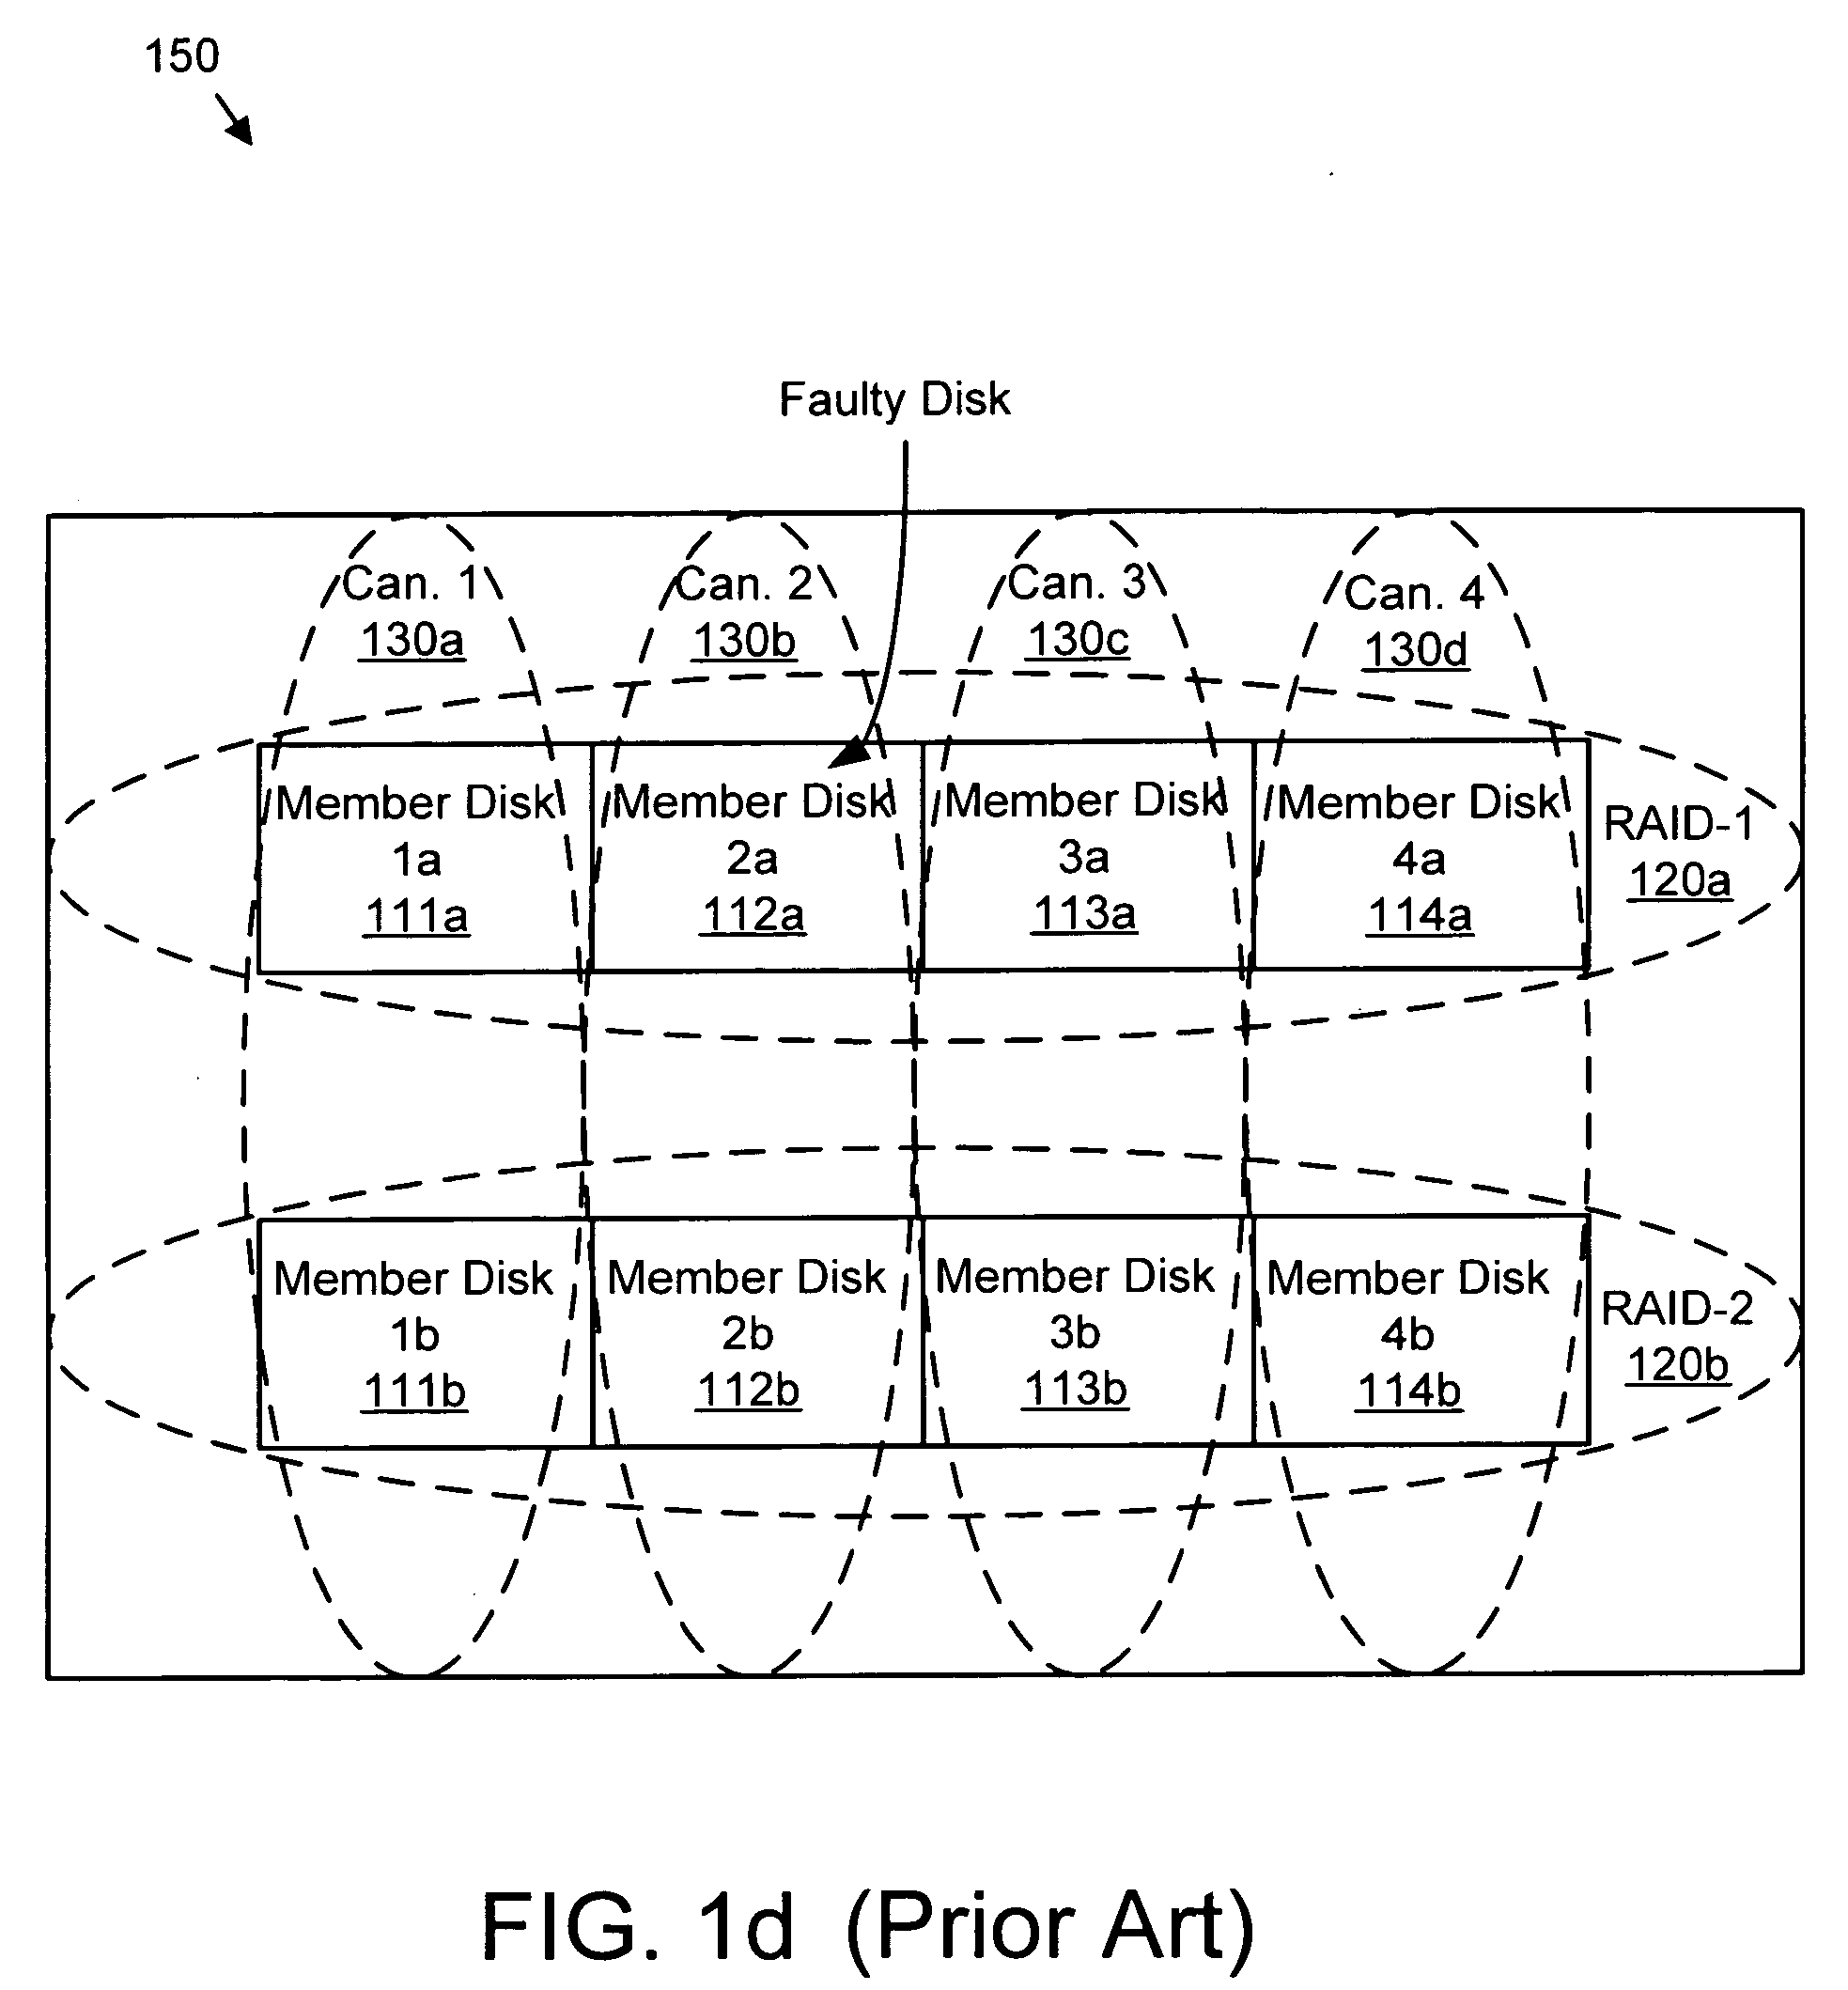 Apparatus, system, and method for differential rebuilding of a reactivated offline RAID member disk